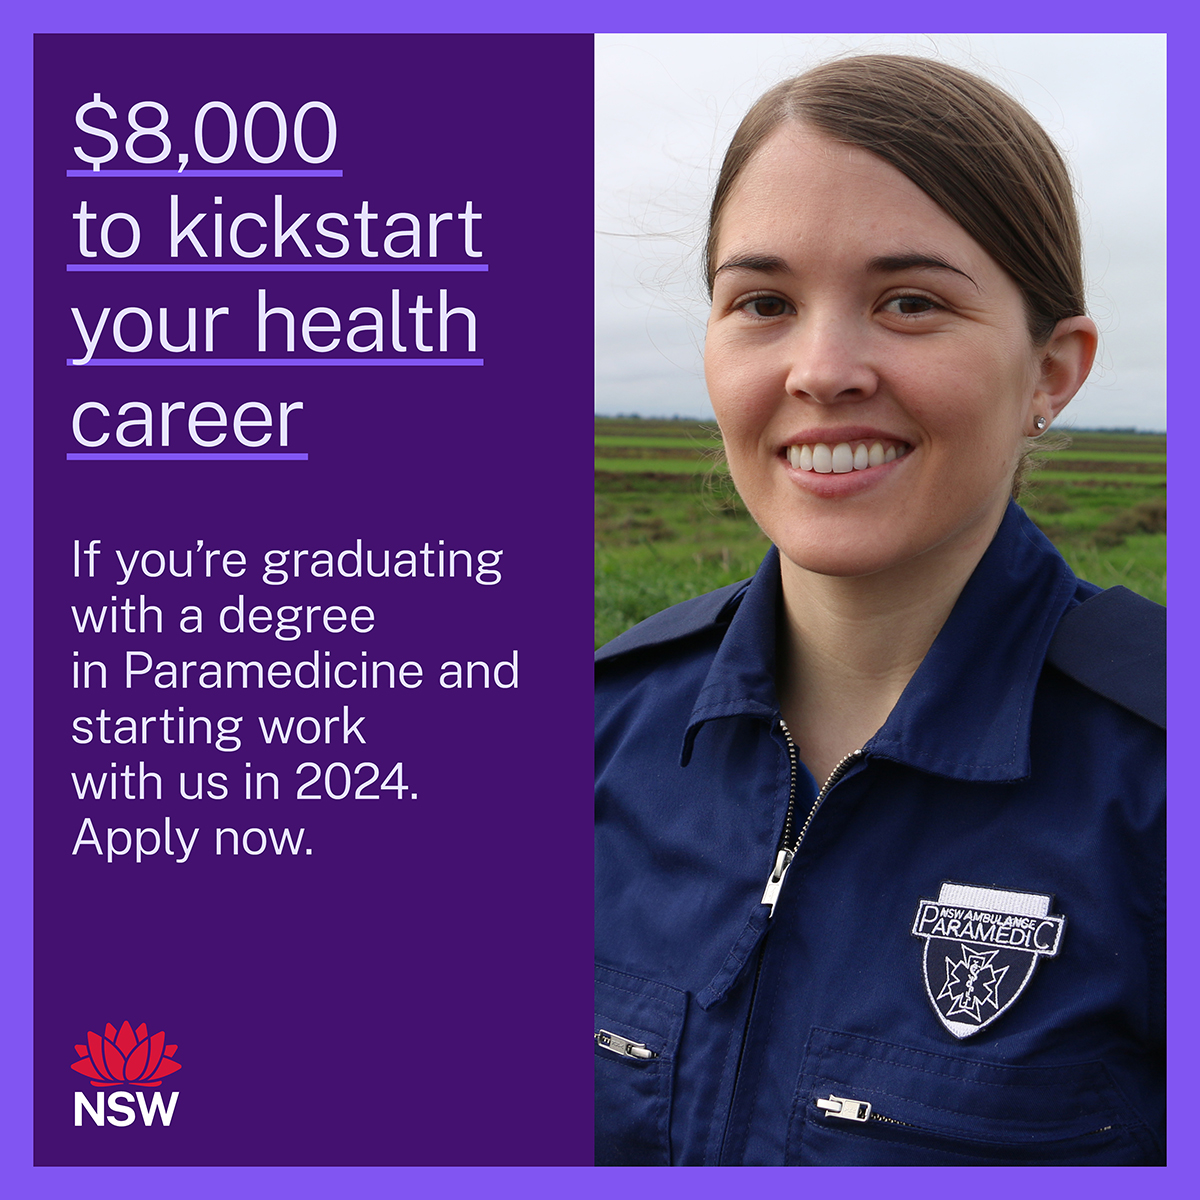 Would $8,000 make a difference to your career in health? If you're a paramedicine graduate, NSW Health will pay you up to $8,000 to start your career. To be eligible, you need to be a graduate starting a job with NSW Health in 2024. Apply today: health.nsw.gov.au/studysubsidies